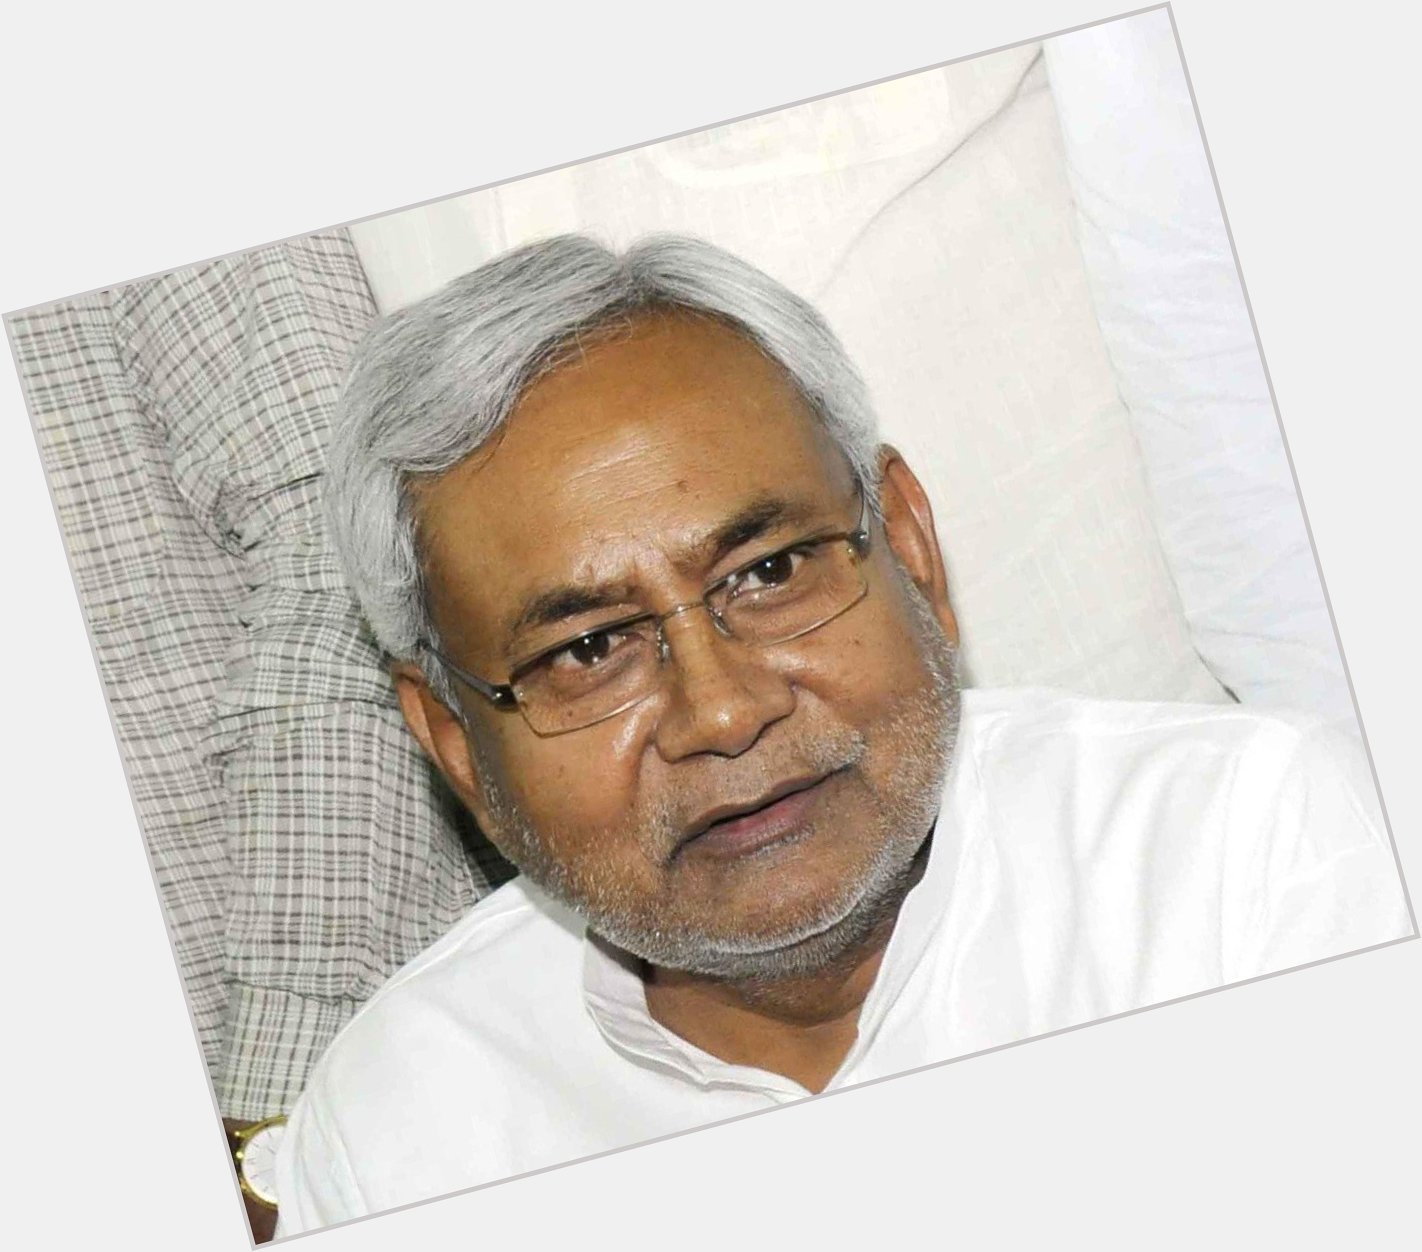 Happy Birthday to Nitish Kumar Ji 
He is an Indian Chief Minister,  Politician, Chairperson & Engineer. 